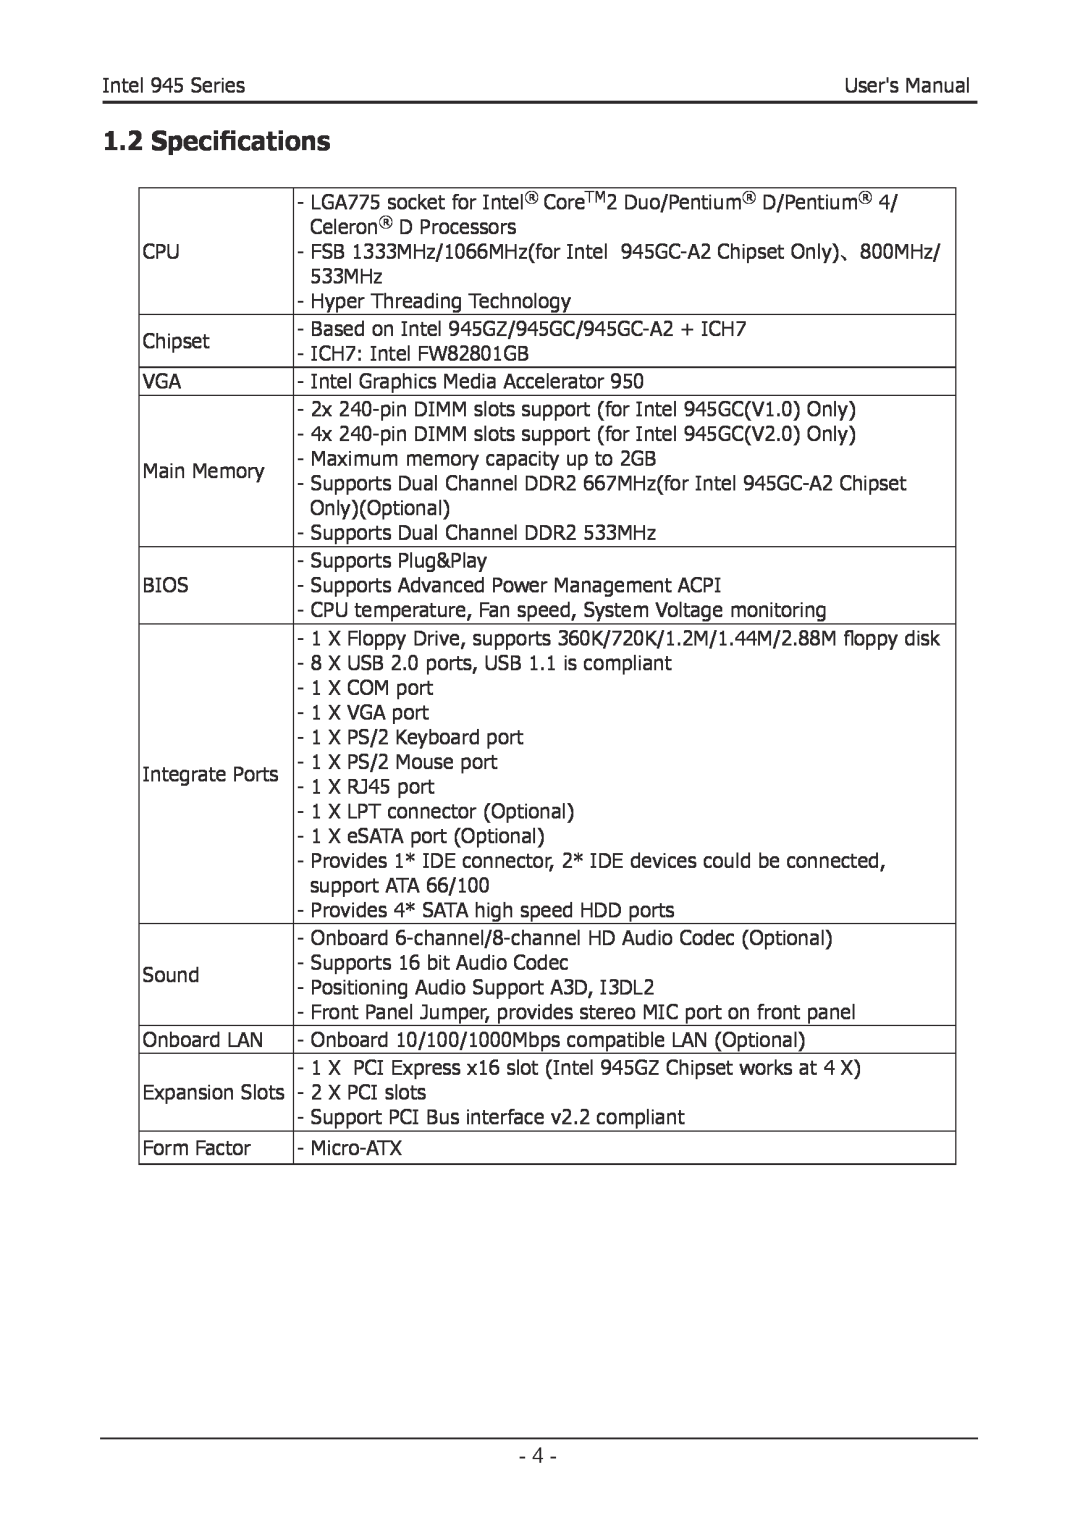 Intel 945GZT, 945GCT user manual Specifications 